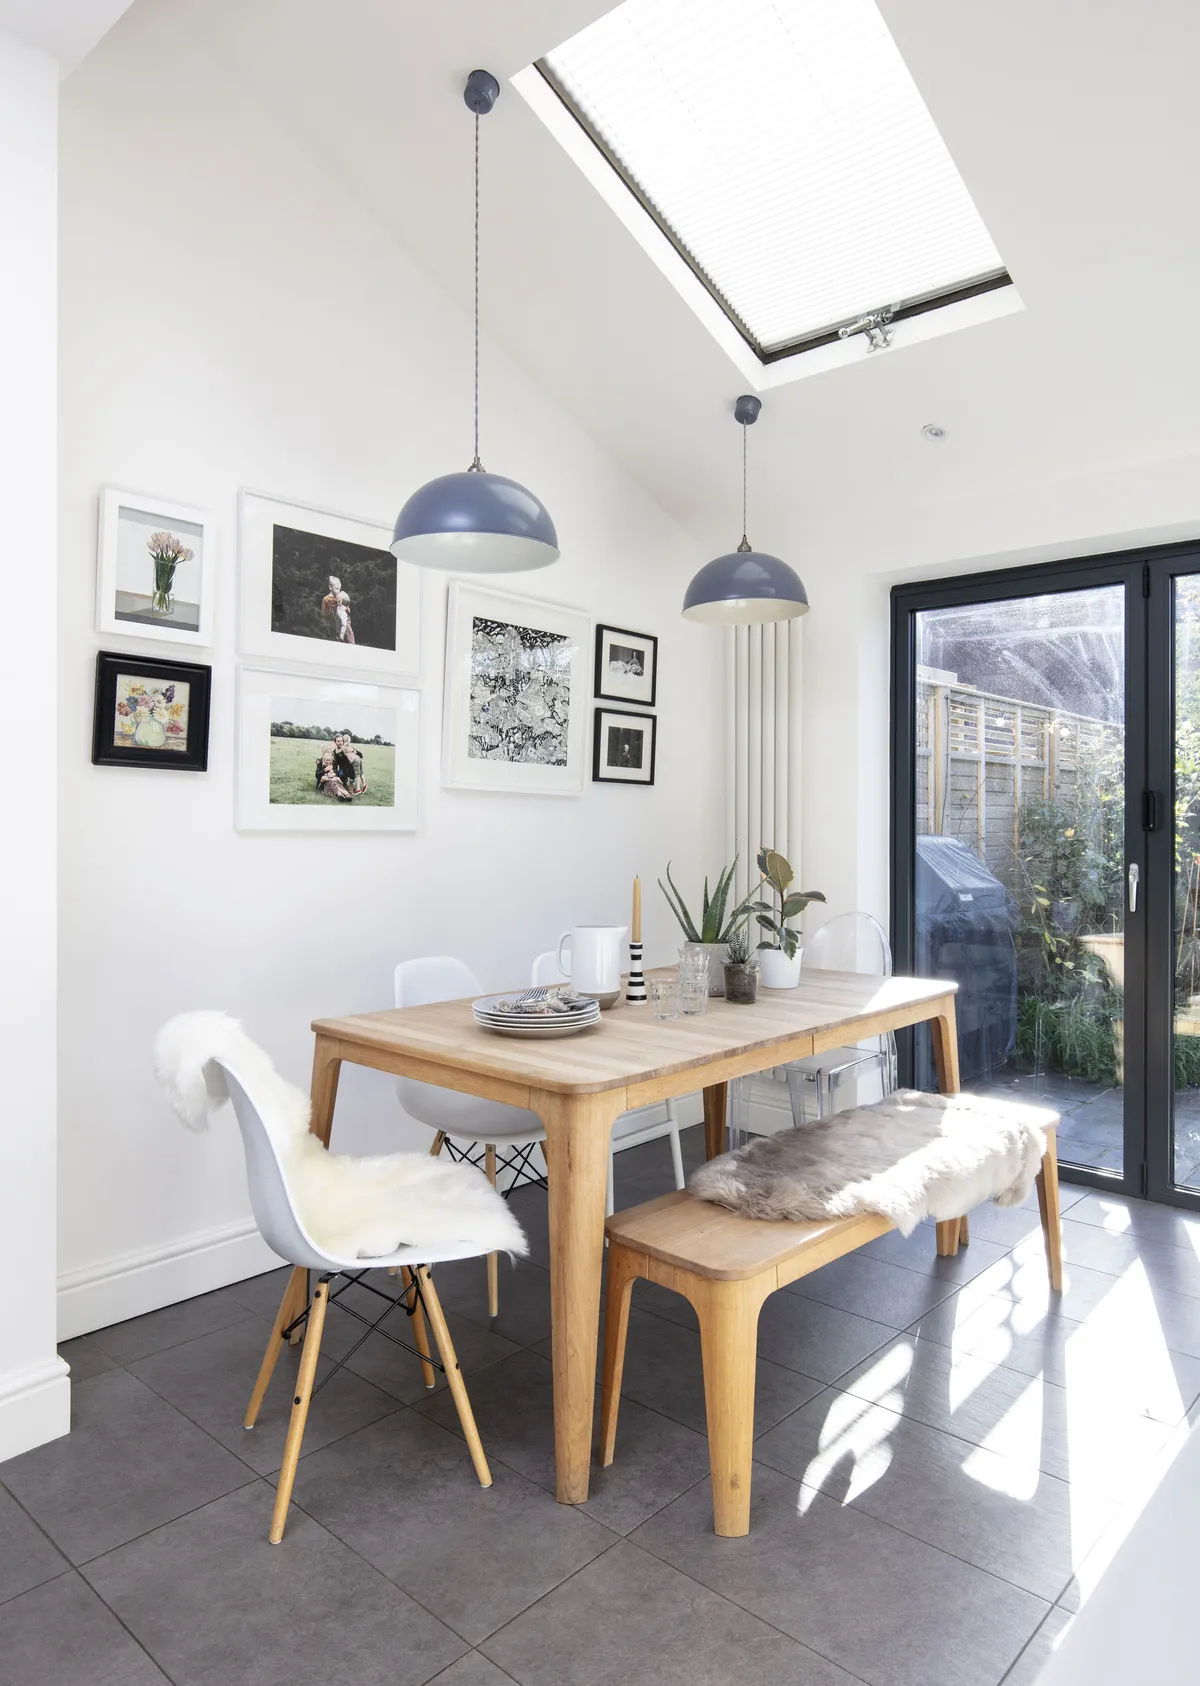 The simple table and bench from John Lewis & Partners really appealed to Polly with her love of Scandinavian design. She invested some of her kitchen budget in it, along with grey sheepskin rugs from Dunelm to give a cosy feel when the weather’s colder